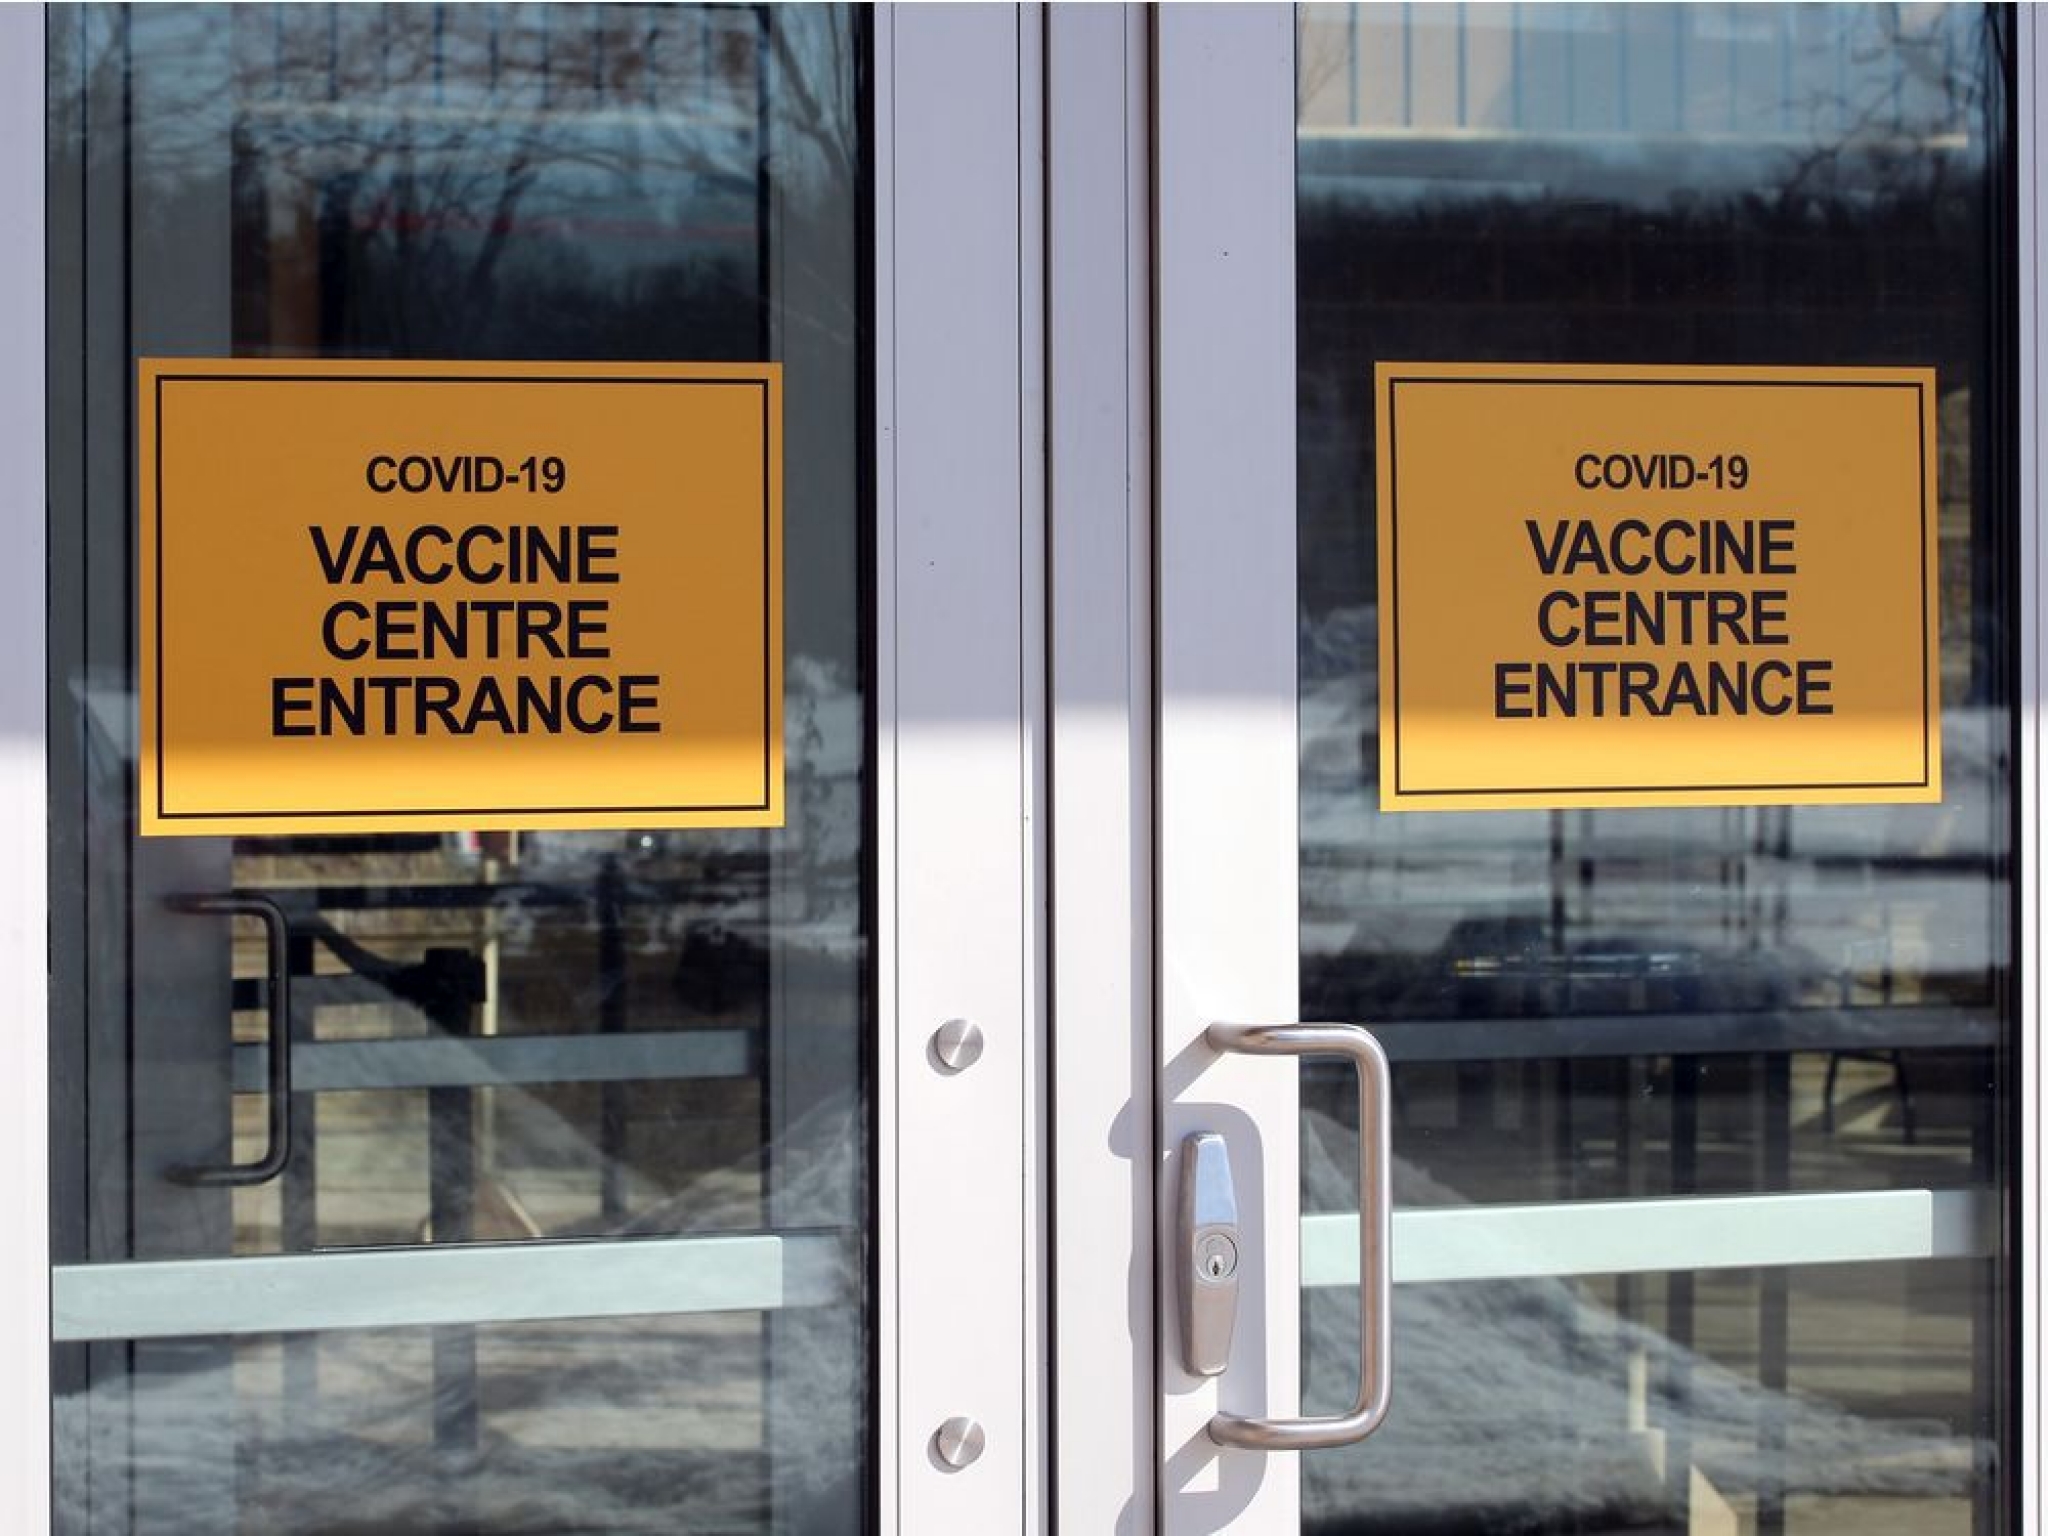 Reader letter: Vaccine experience at Sportsplex was exceptional